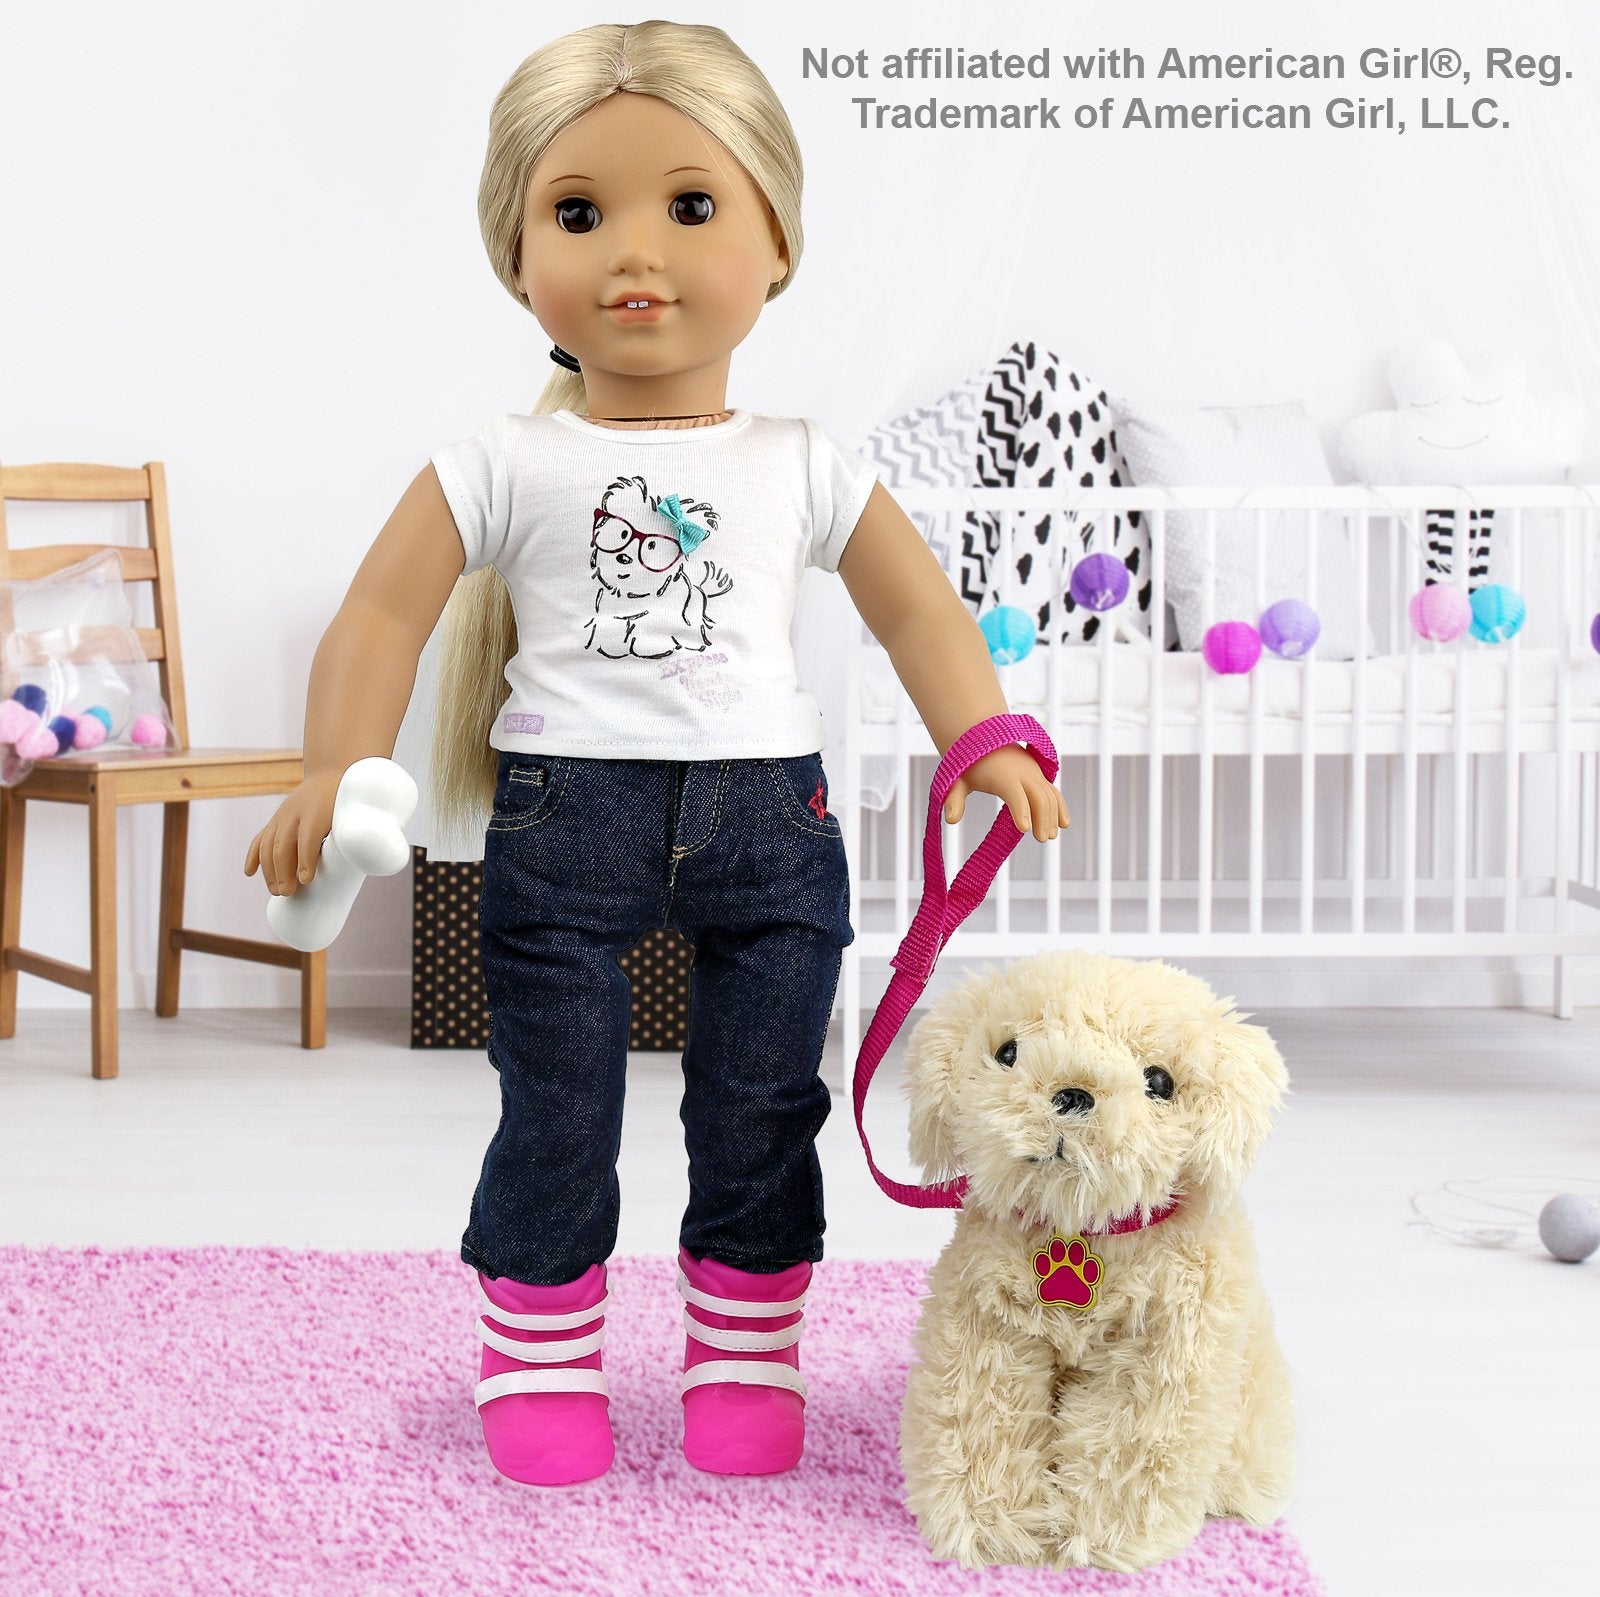 Click N' PLAY 9 piece Doll Puppy Set and Accessories. Perfect For 18 inch American Girl Dolls